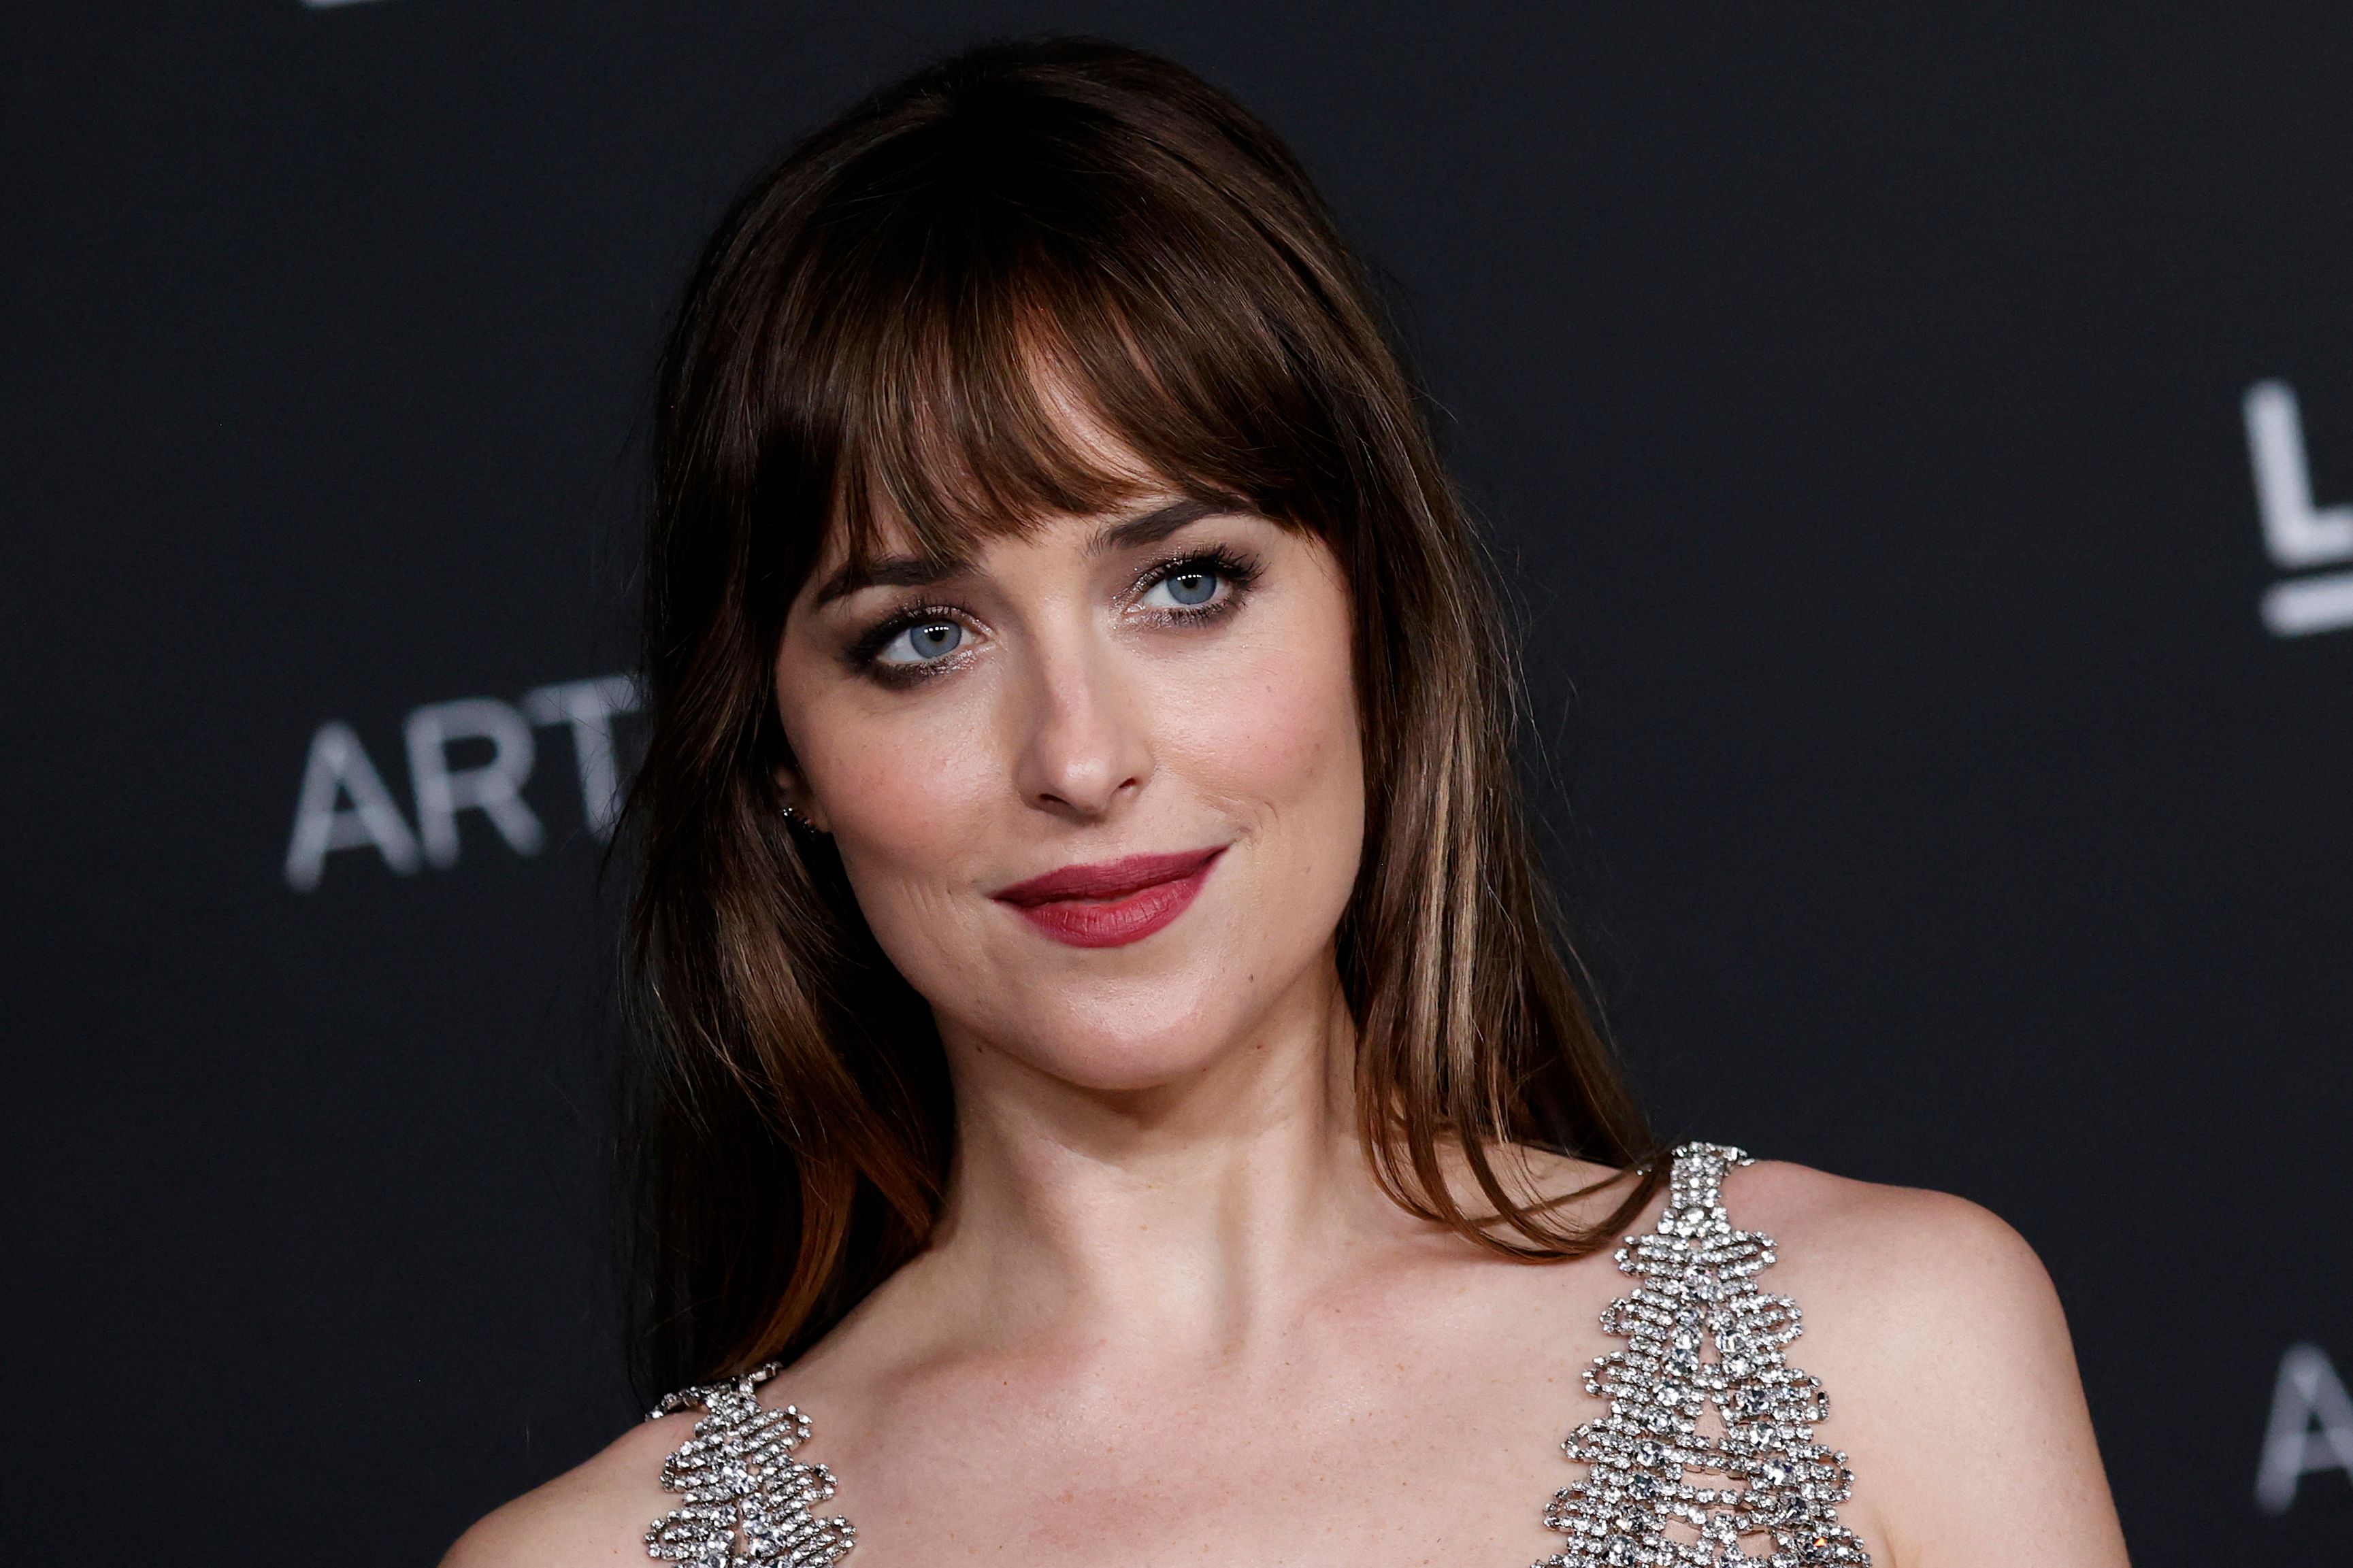 Dakota Johnson Dares to Bare in Very Sheer Outfit, Hints at Drama